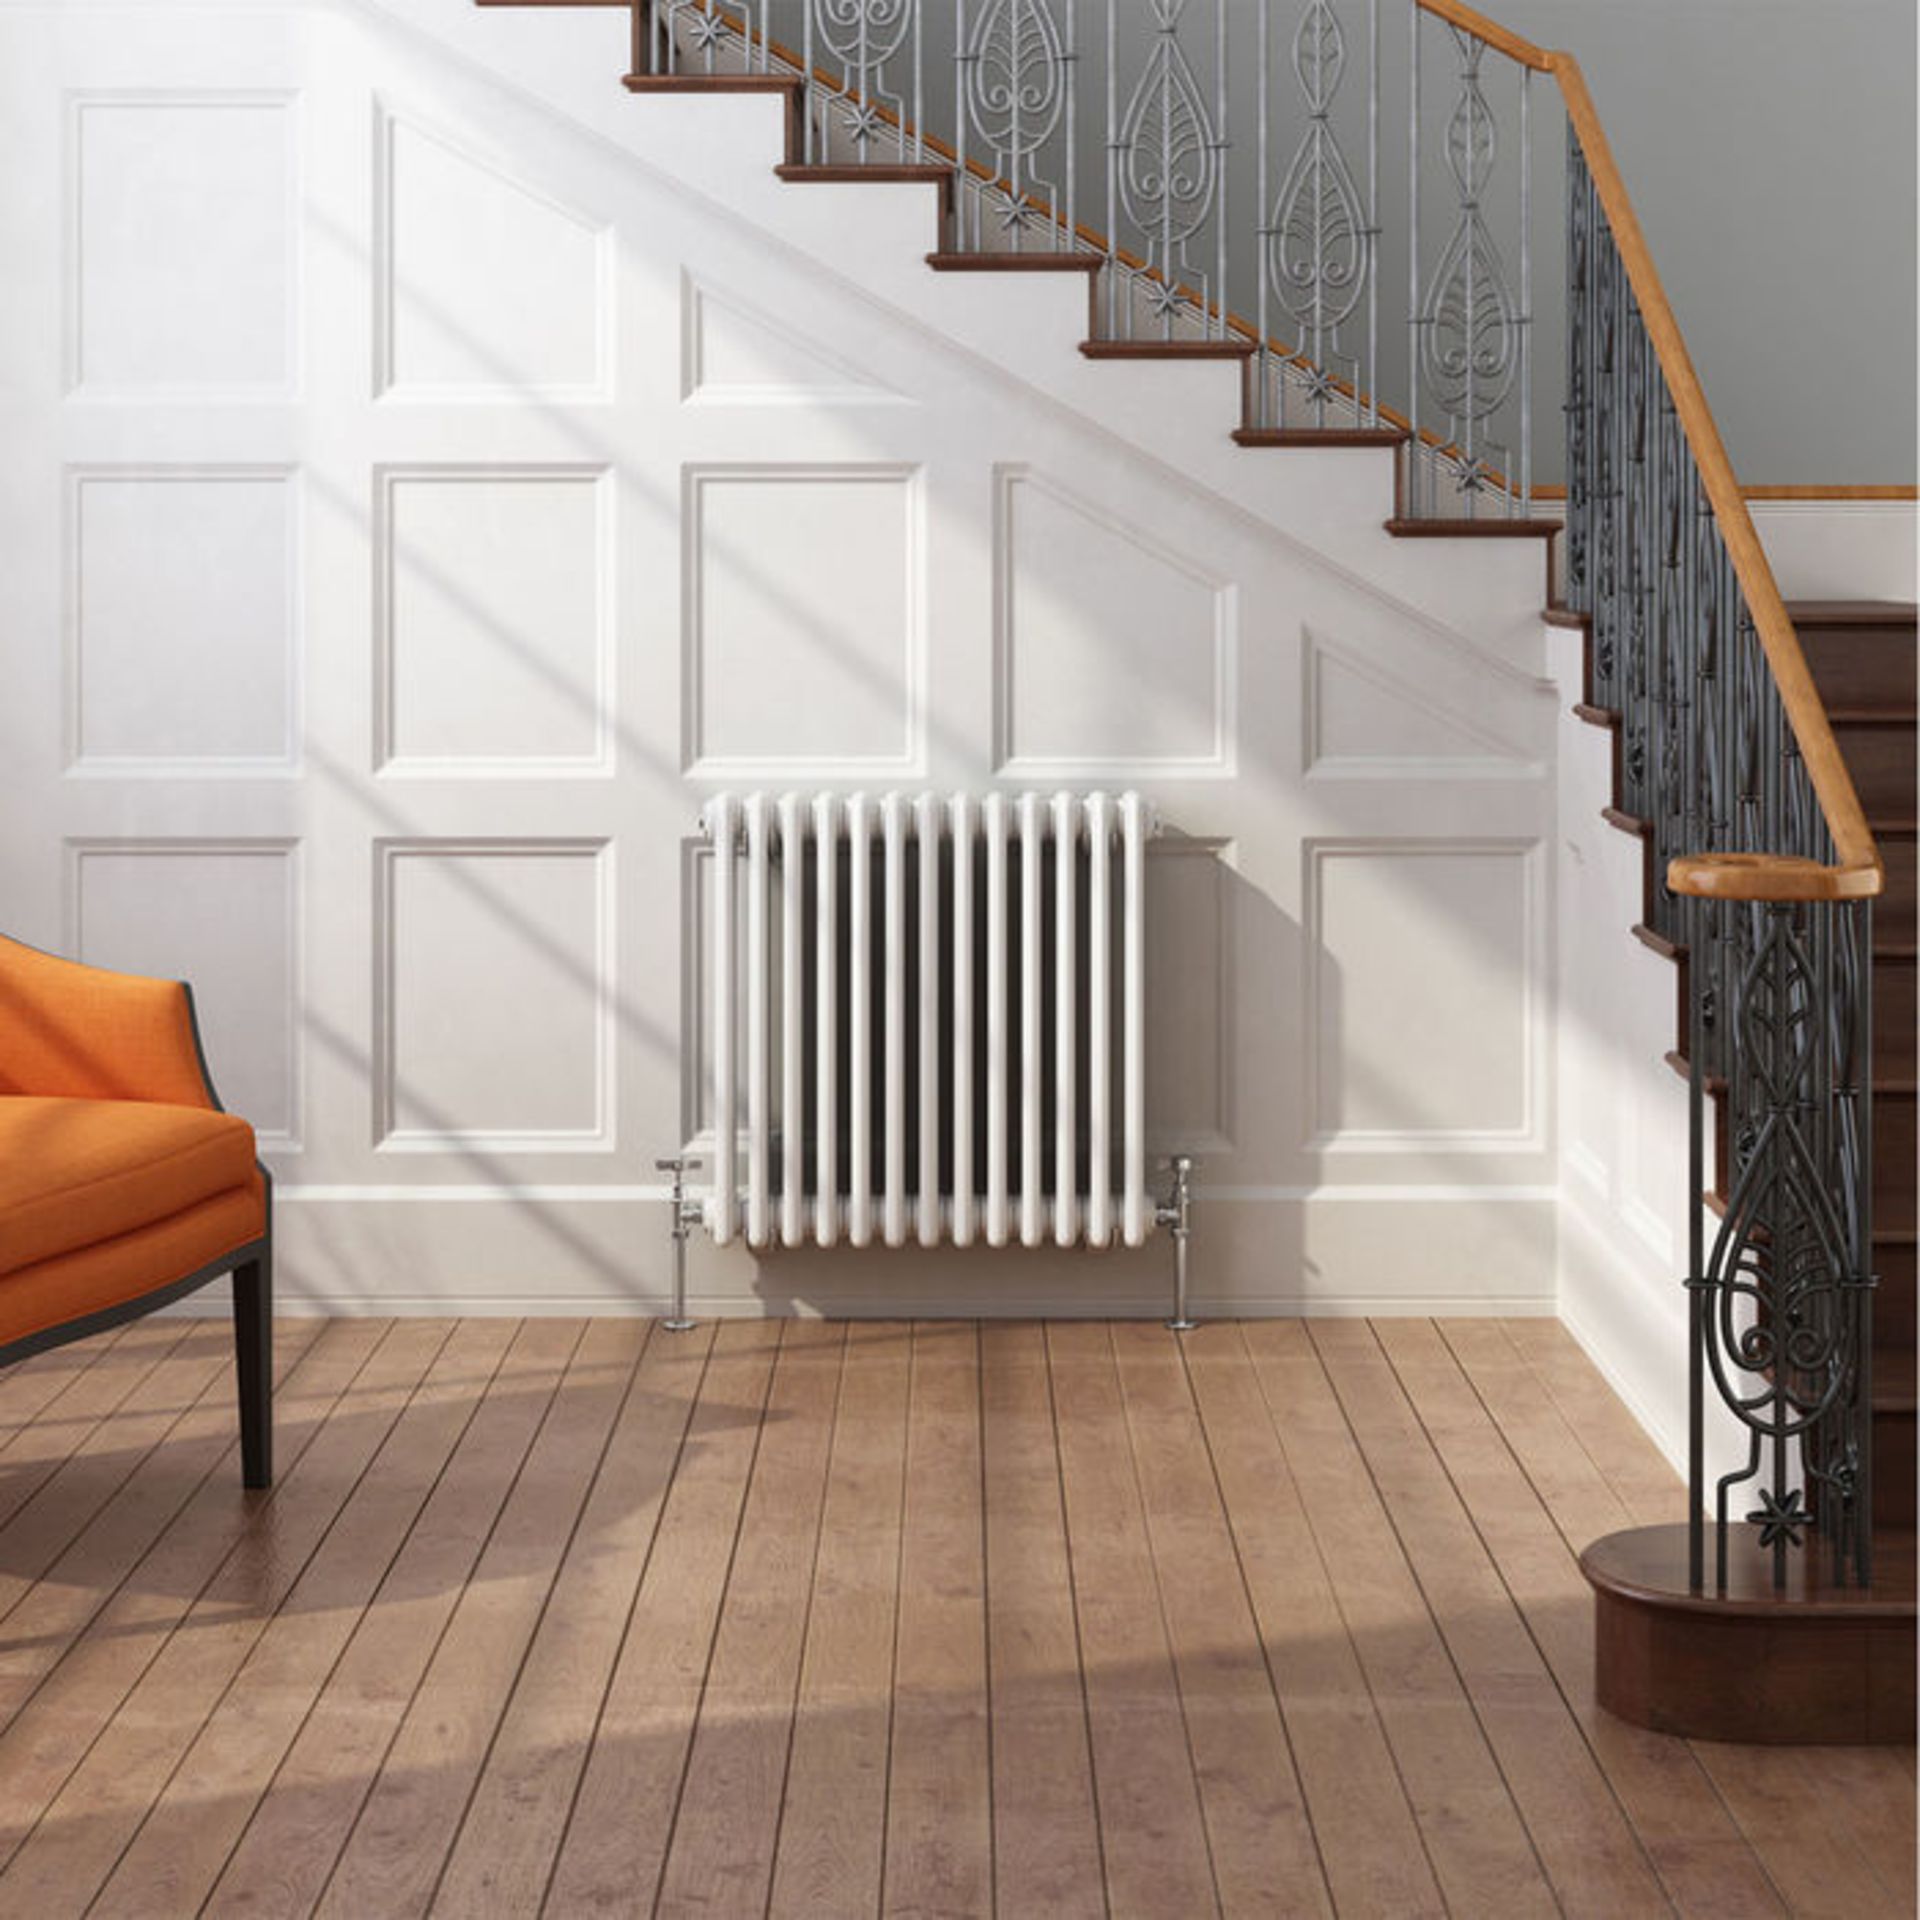 New (Z36) 600x628mm White Double Panel Horizontal Colosseum Traditional Radiator. RRP £395.99... - Image 2 of 3